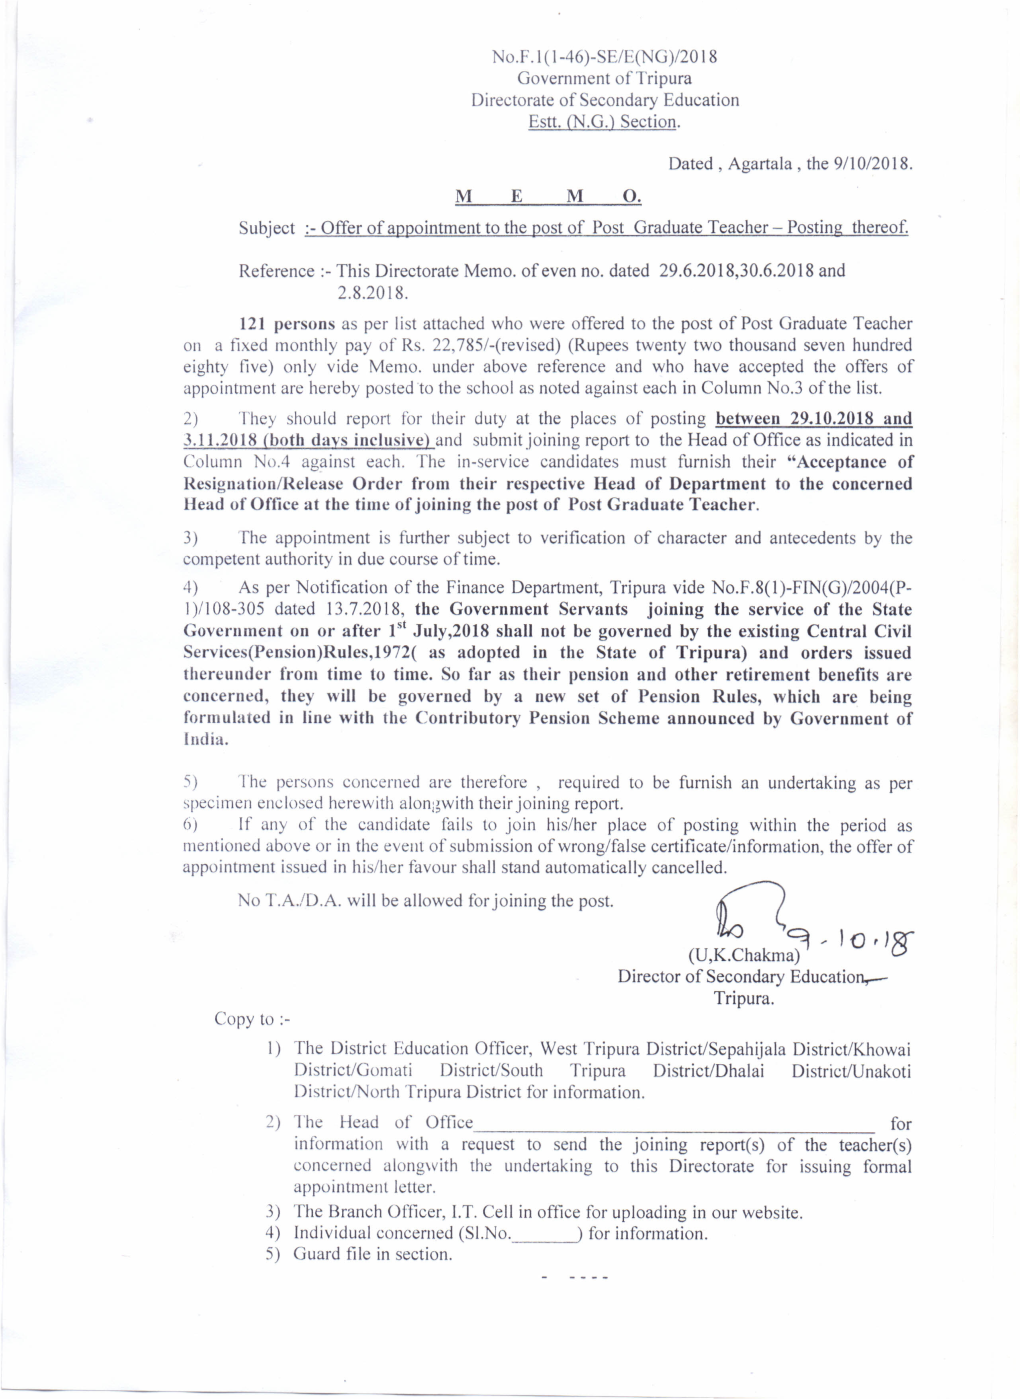 Offer of Appointment to the Post of PGT-Posting Thereof